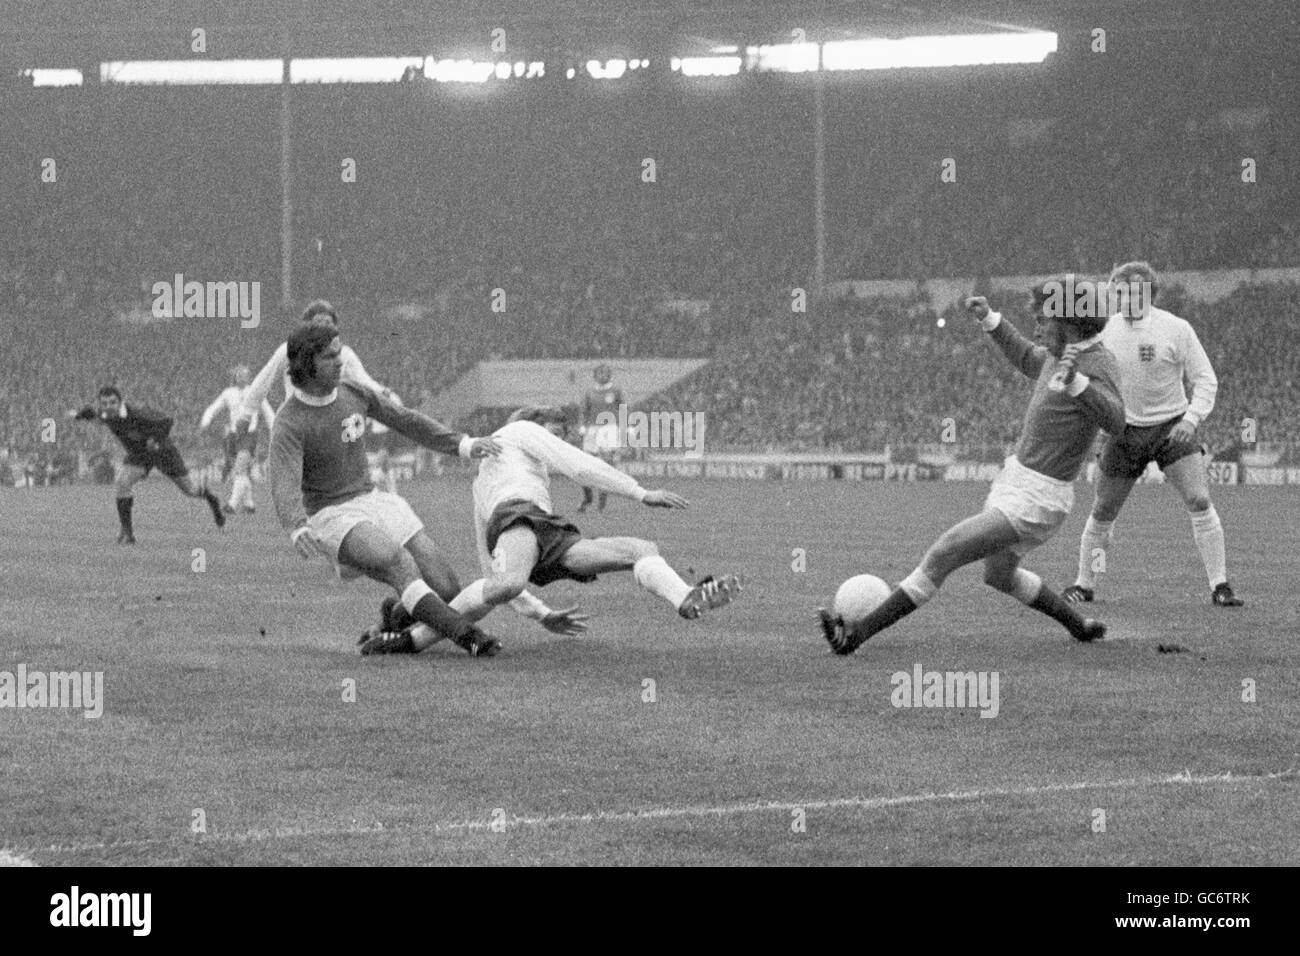 West Germany's Gerd Muller (l) and Paul Breitner (r) thwart England's Colin Bell (c) as Francis Lee (far right) looks on. West Germany won the game 3-1. Stock Photo